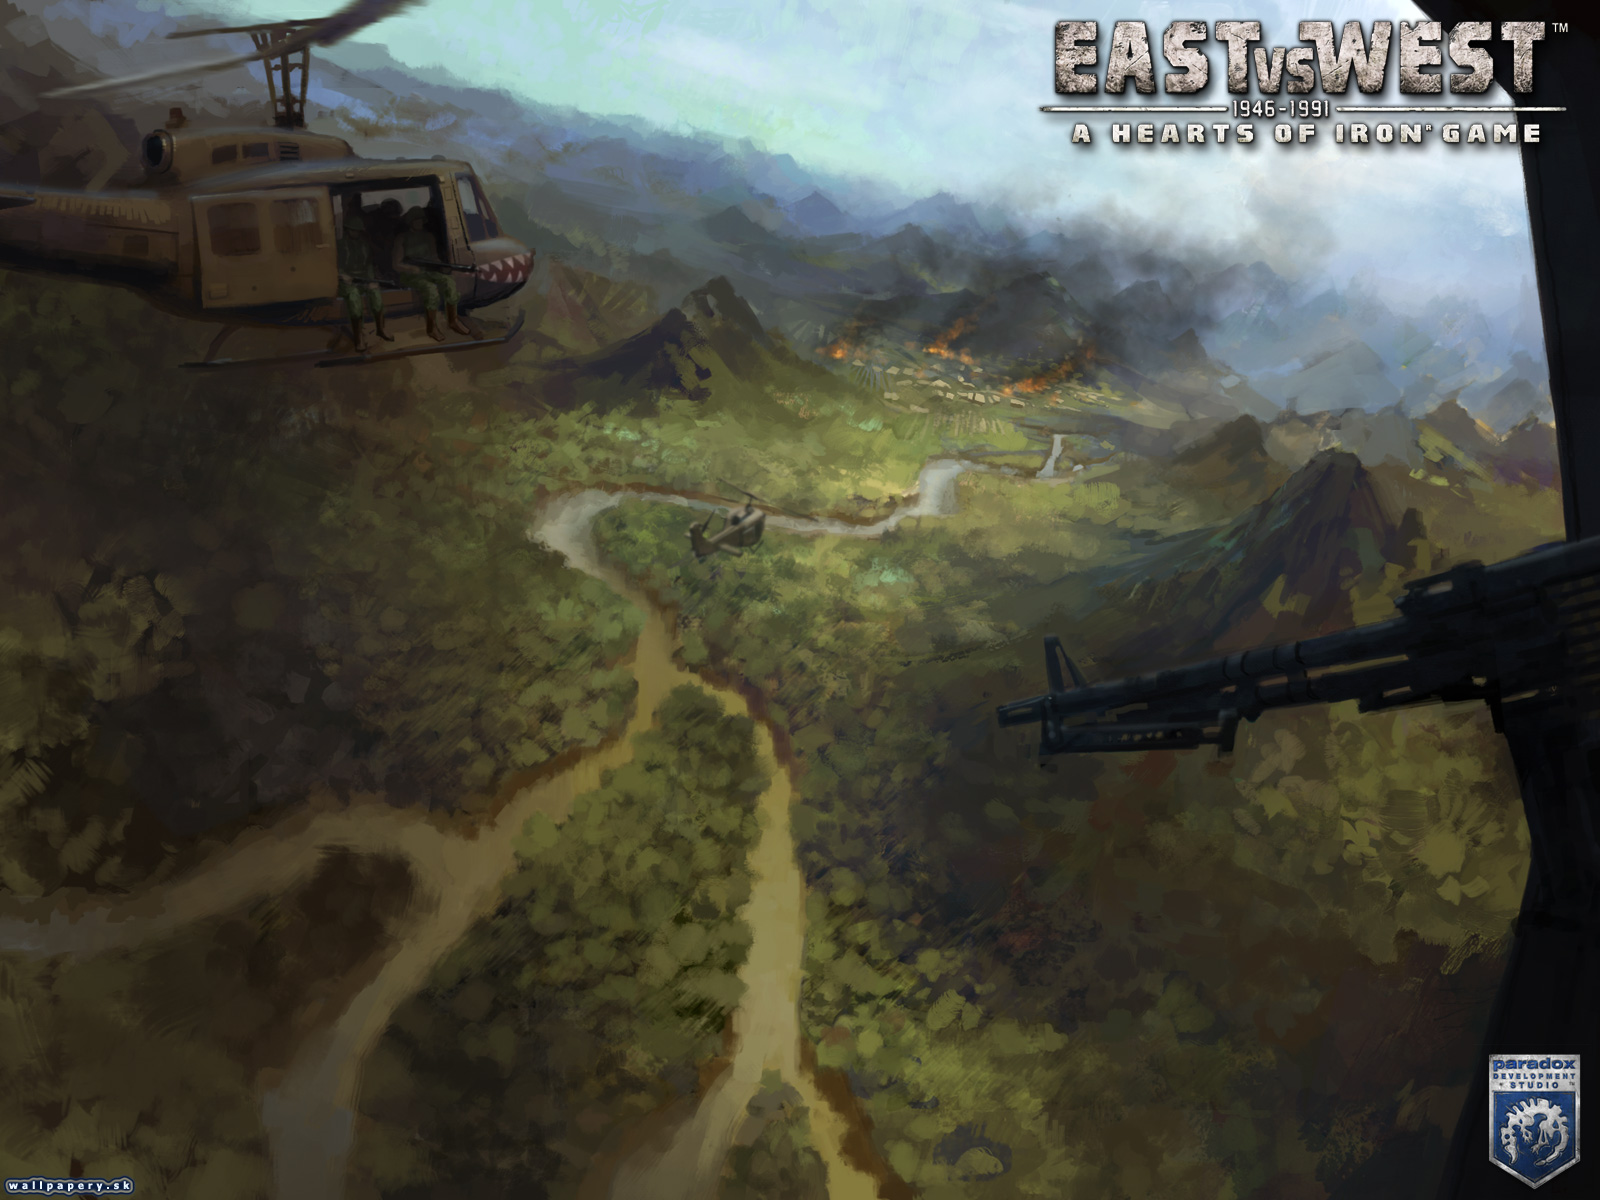 East vs. West: A Hearts of Iron Game - wallpaper 2